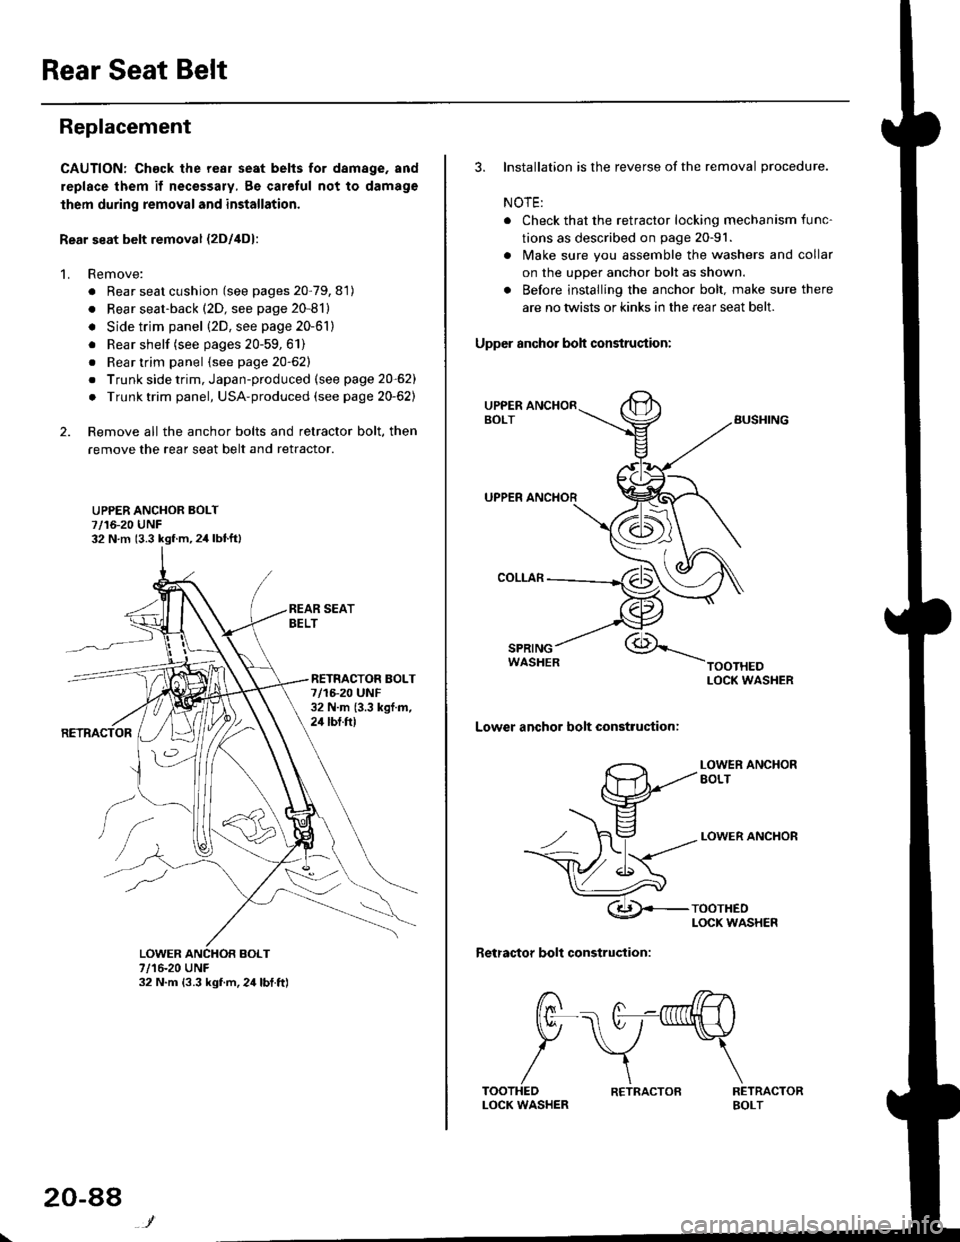 HONDA CIVIC 1996 6.G Workshop Manual Rear Seat Belt
Replacement
CAUTION: Chack the rear seat belts for damage, and
replace them if necessary, 8e carolul not to damage
lhem during removal and installation.
Rear seat belt removal {2Dl4D}:
